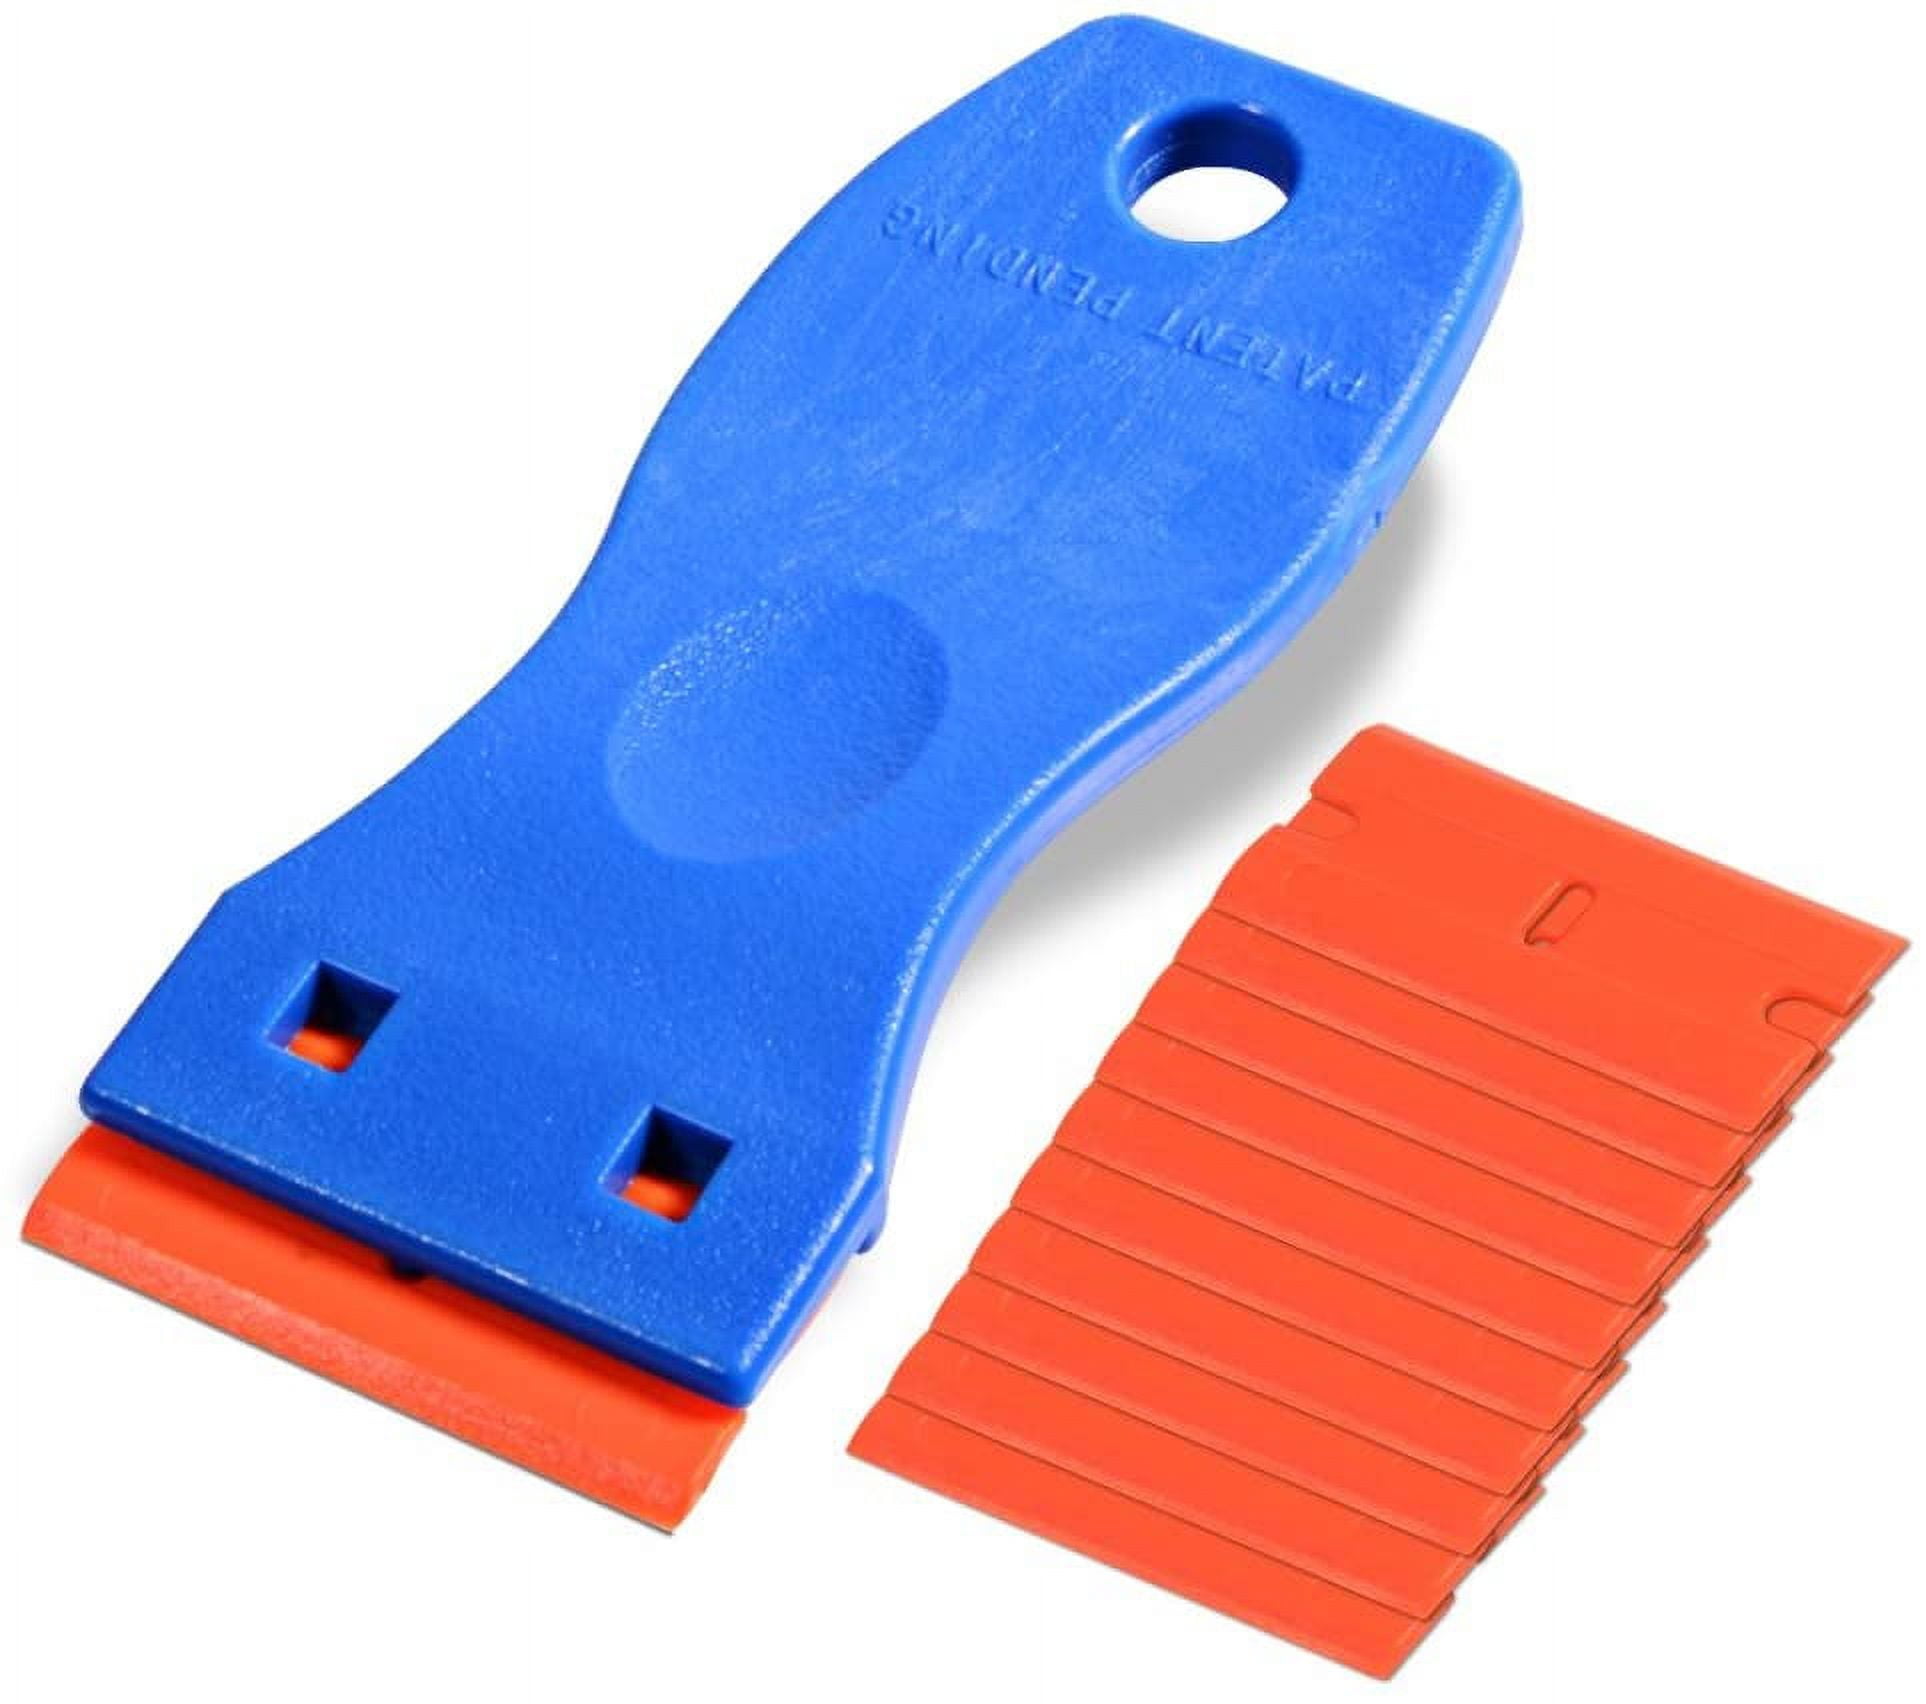 ABS Plastic Razor Blade Scraper, Blade Scraper Cleaning Tool with Sharp  Polished Edges, Portable Label Remover for Scrape Off Labels, Decals